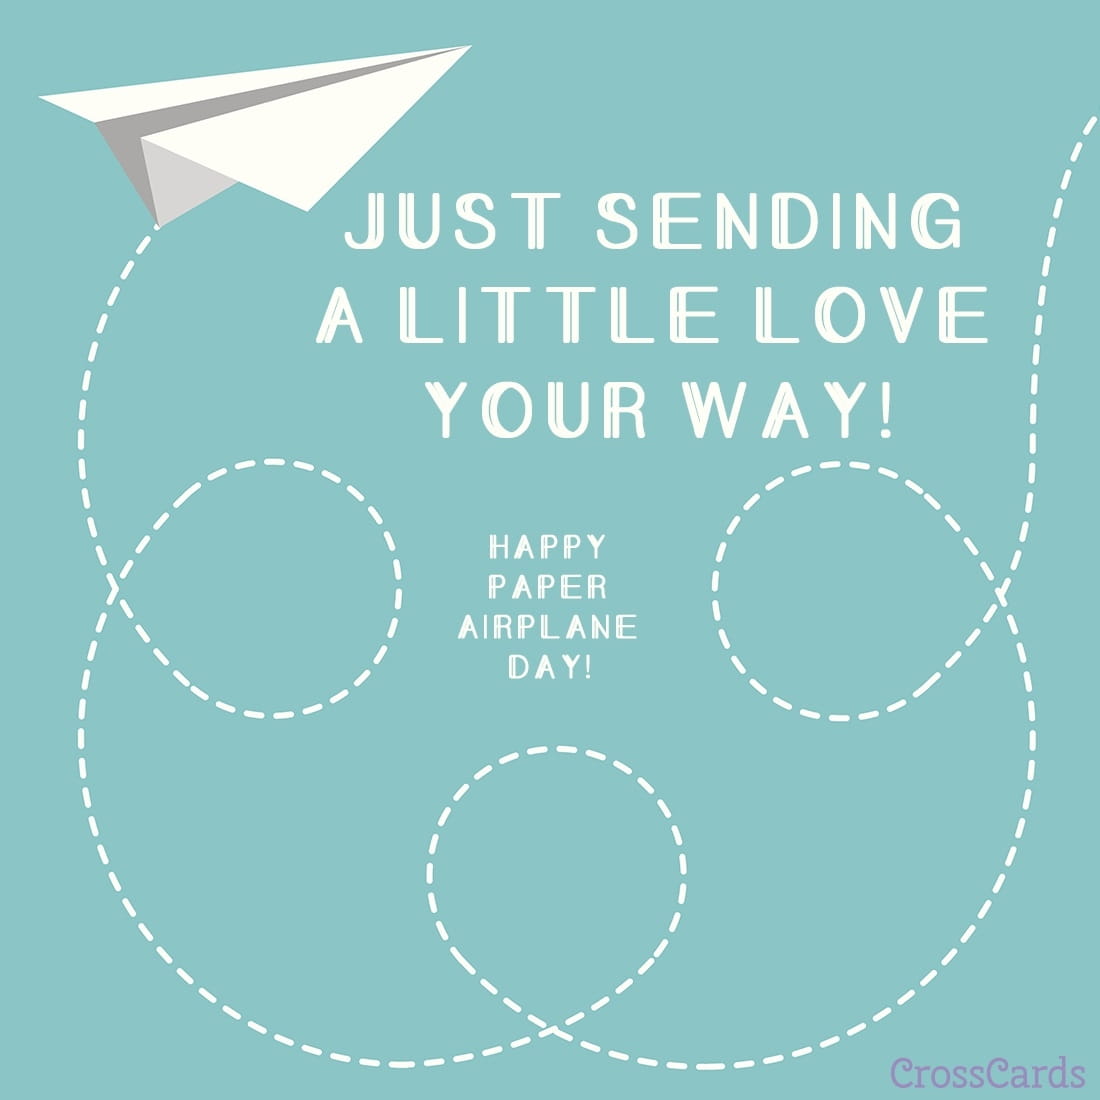 Happy Paper Airplane Day! (5/26) ecard, online card